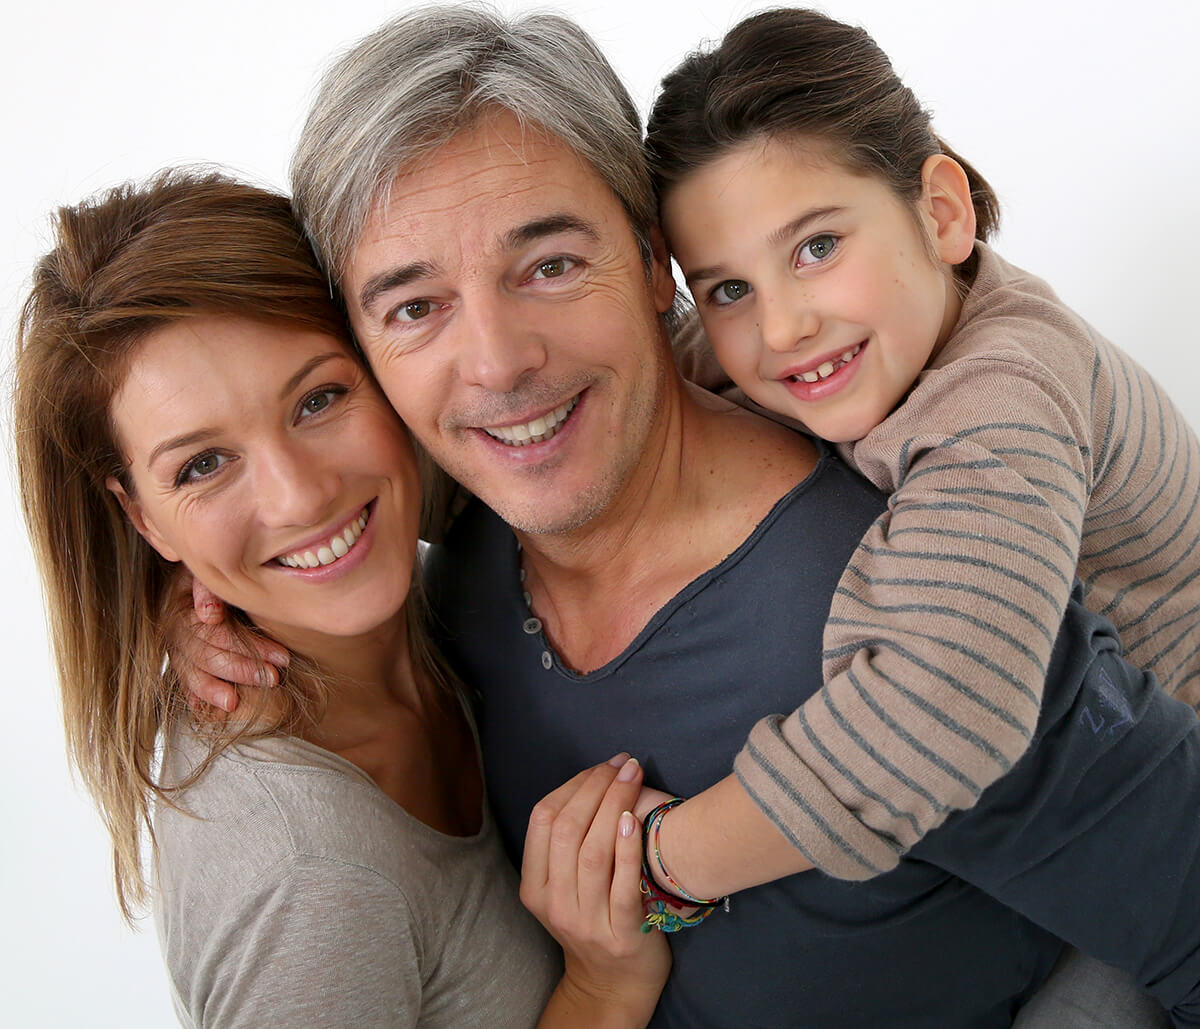 Family Dentist Office Turlock CA Area-Why Taking the Whole Family to the Dentist is Important